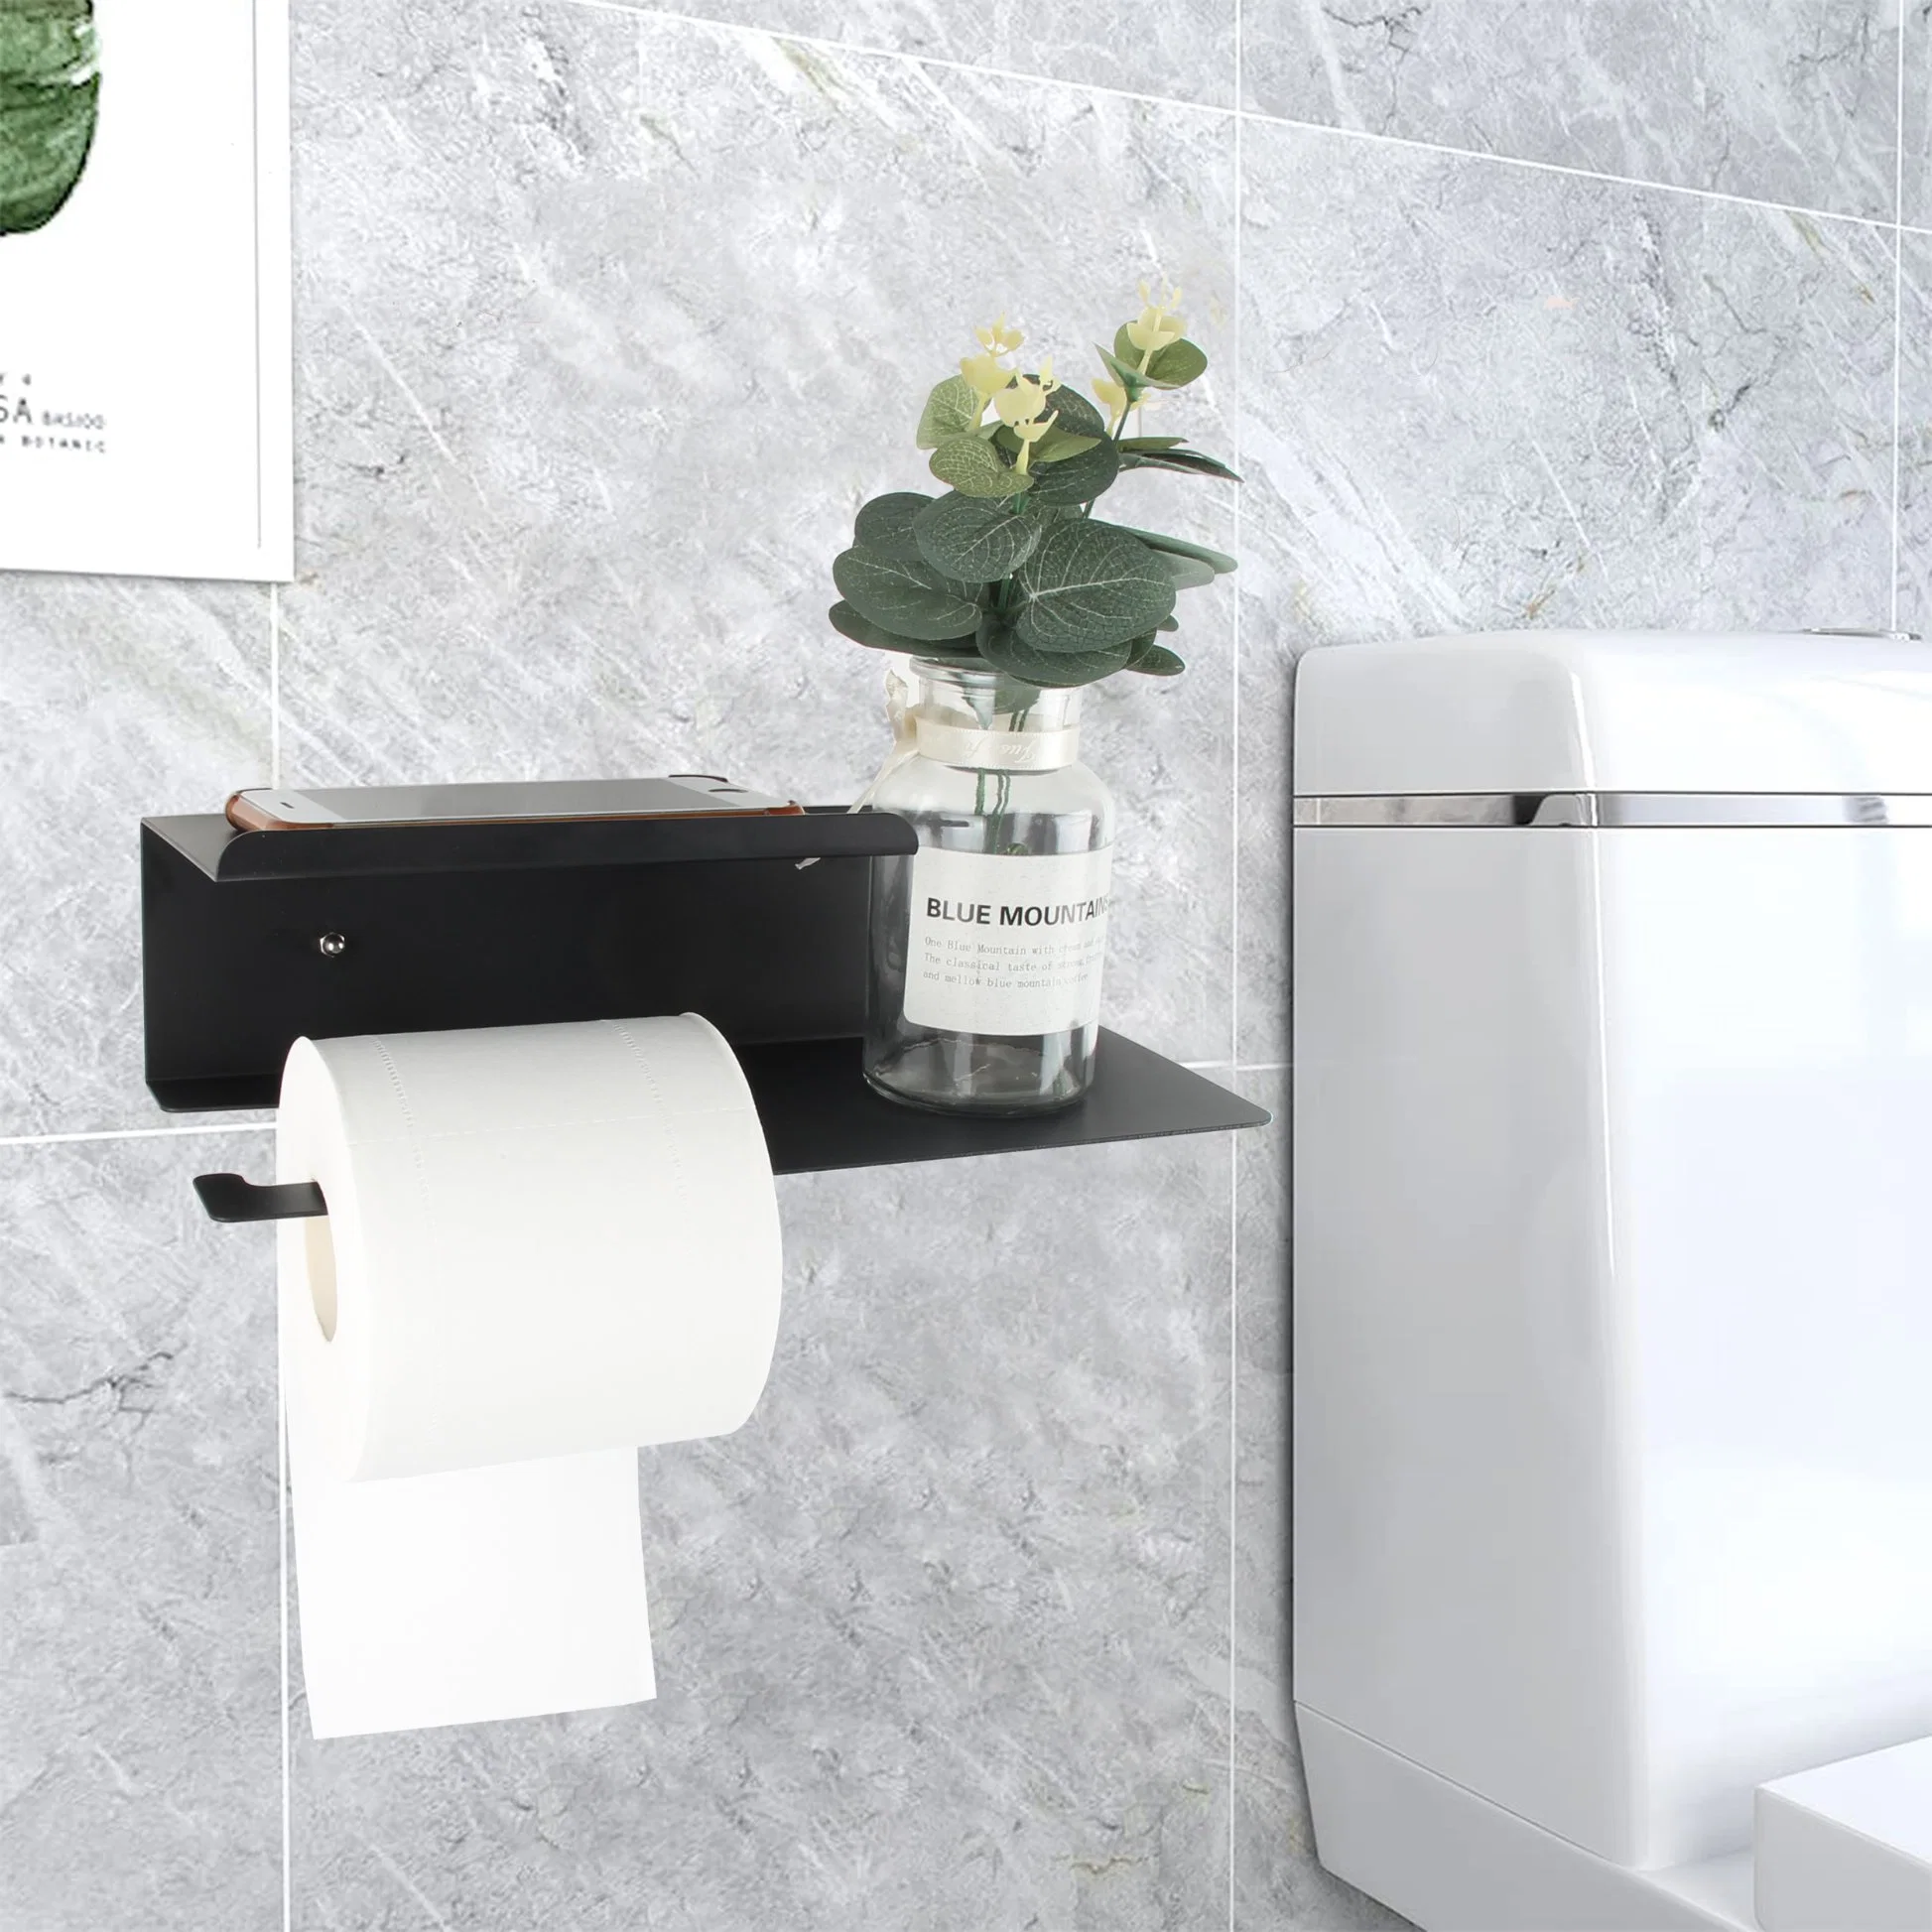 Toilet Paper Holder with Shelf Wall Mounted Toilet Paper Storage Double Roll Tissue Holder Dispenser Bathroom